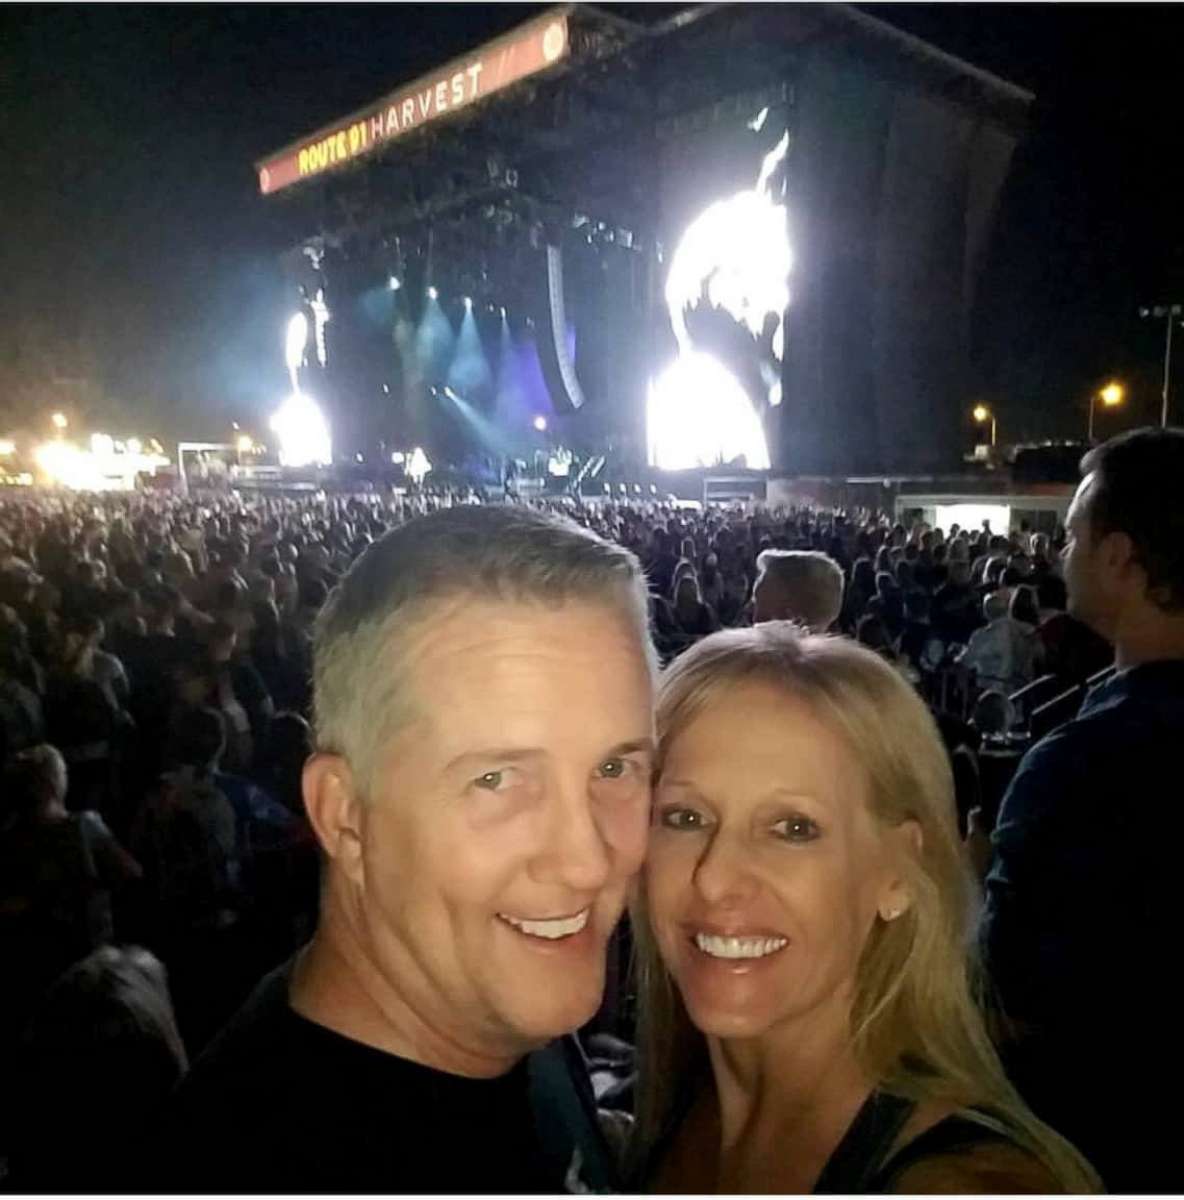 PHOTO: Victor Link, one of the people killed in Las Vegas after a gunman opened fire, Oct. 1, 2017, at a country music festival.